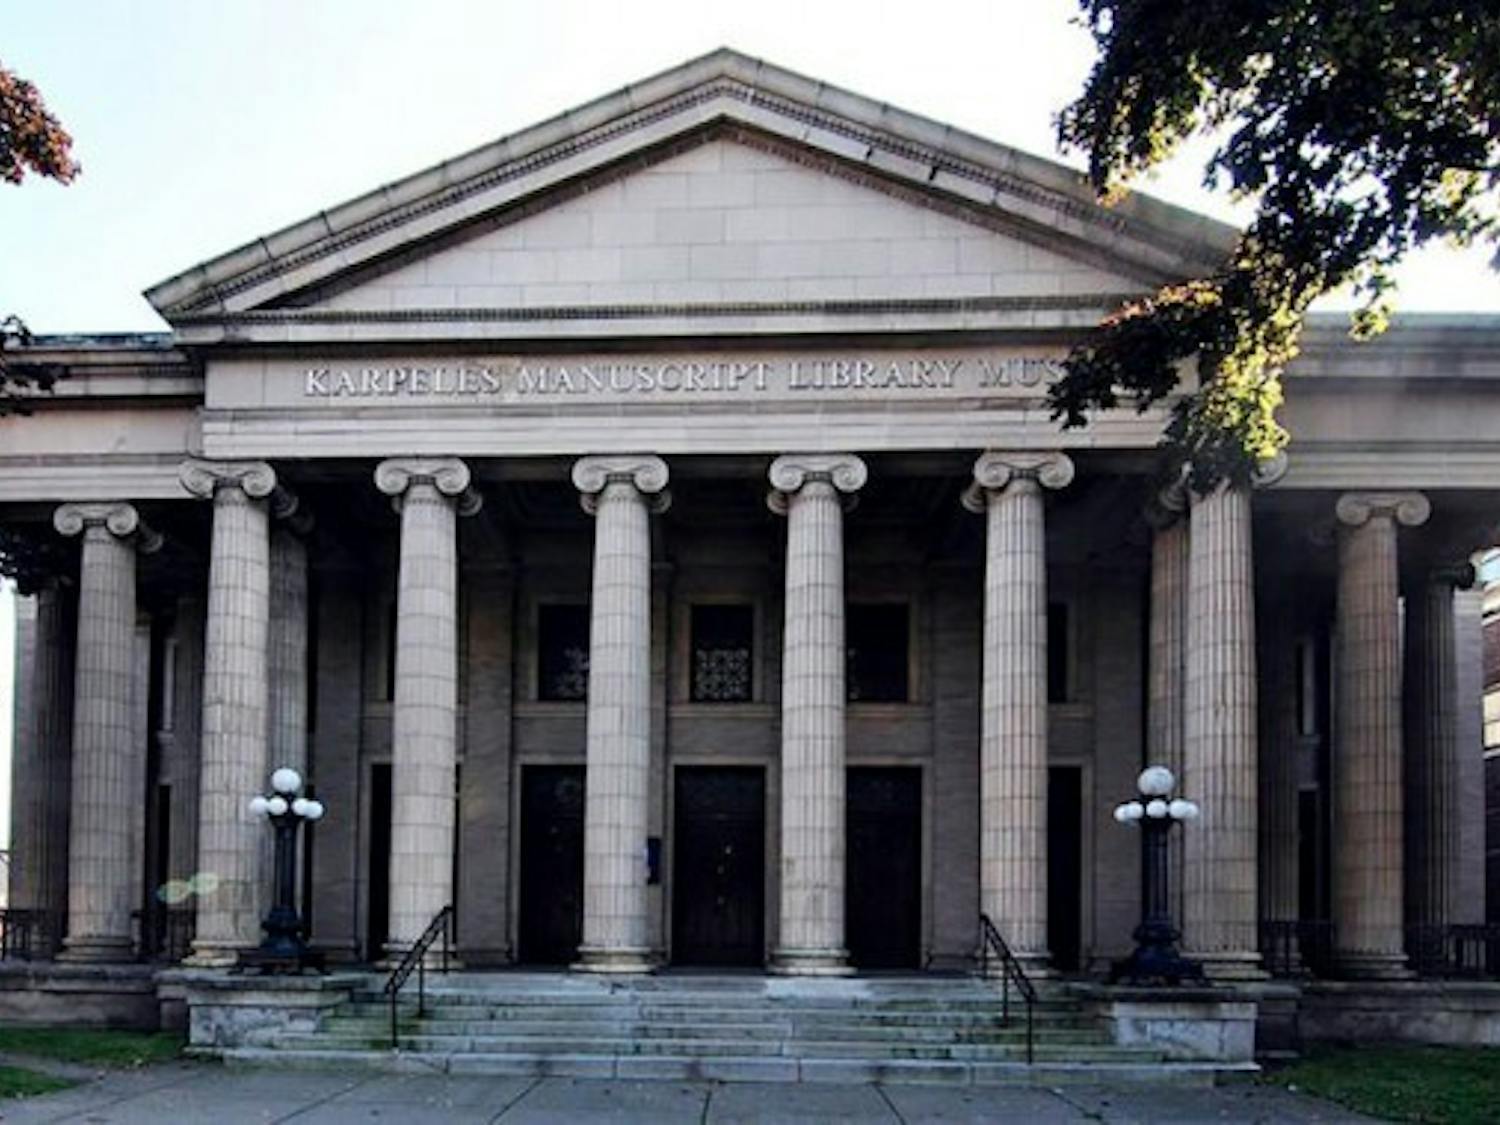 The Karpeles Manuscript Library Museum at 220 North St. is currently hosting an exhibit on early baseball history with materials dating back to the 19th century. The two Karpeles Museums in Buffalo are within walking distance from each other and free to the public Tuesdays through Sundays from 11 a.m. to 4 p.m.&nbsp;Courtesy of Nathan Johnson